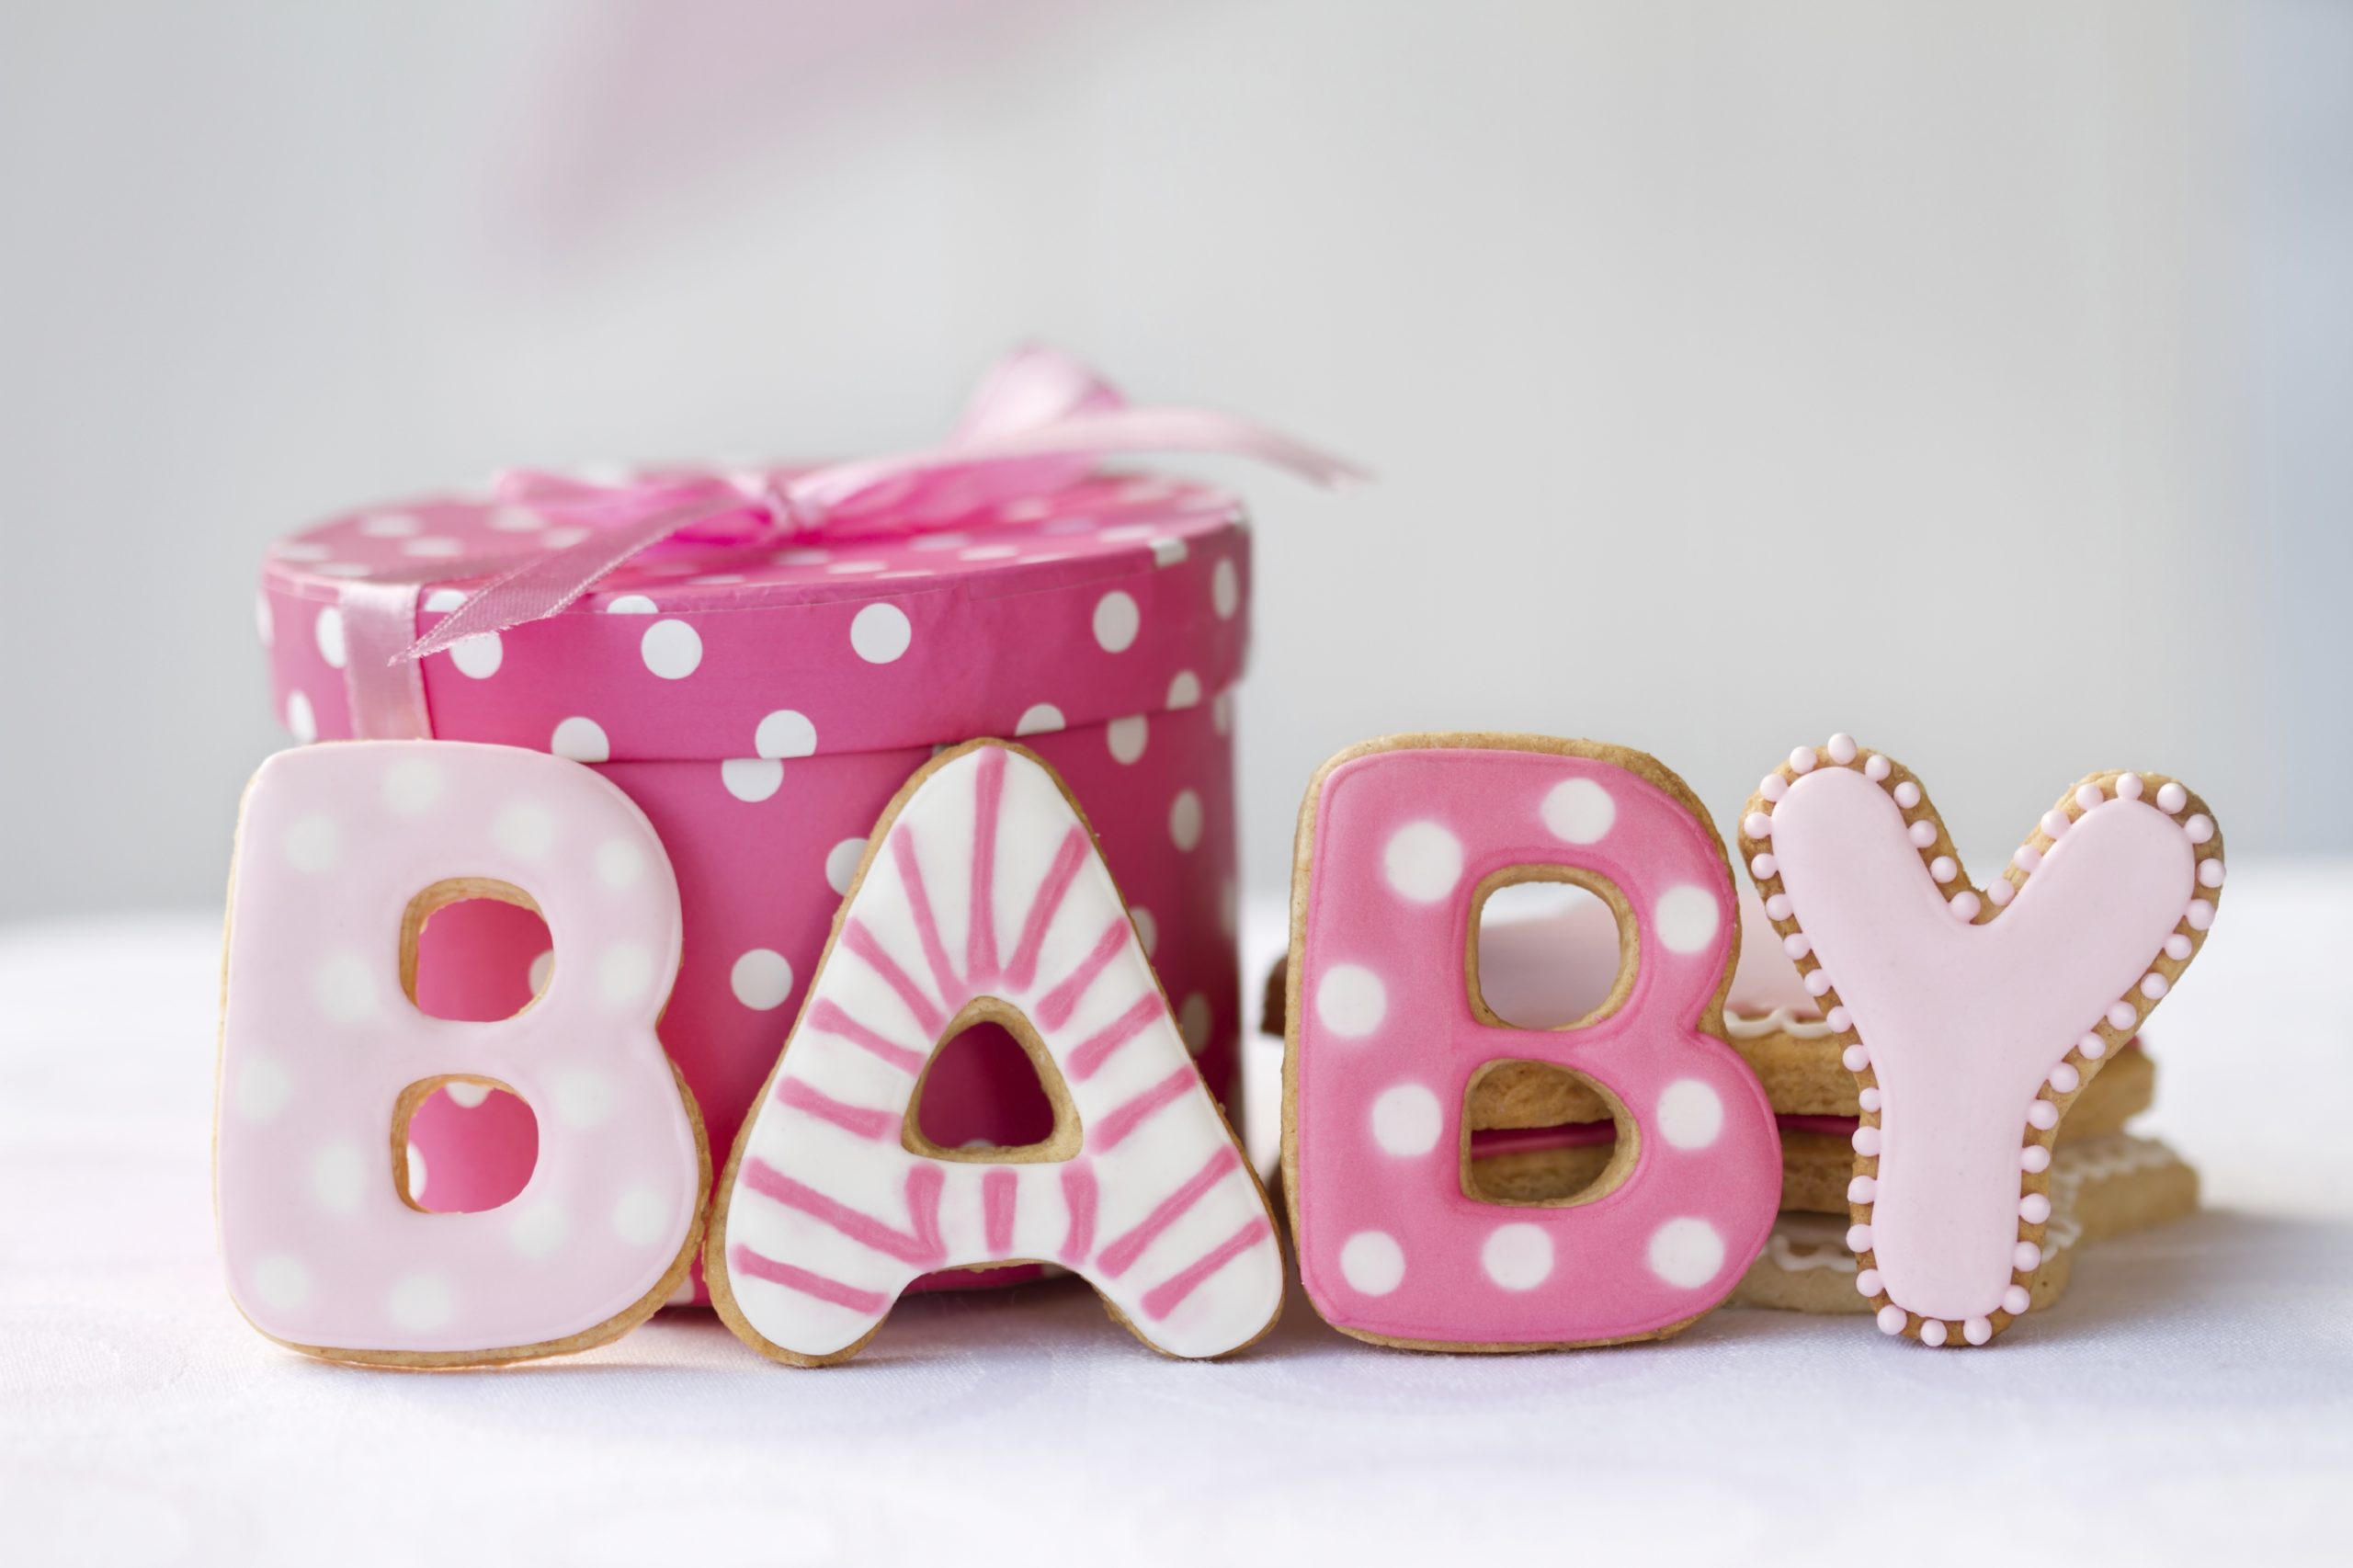 Cookies decorated for a baby girl